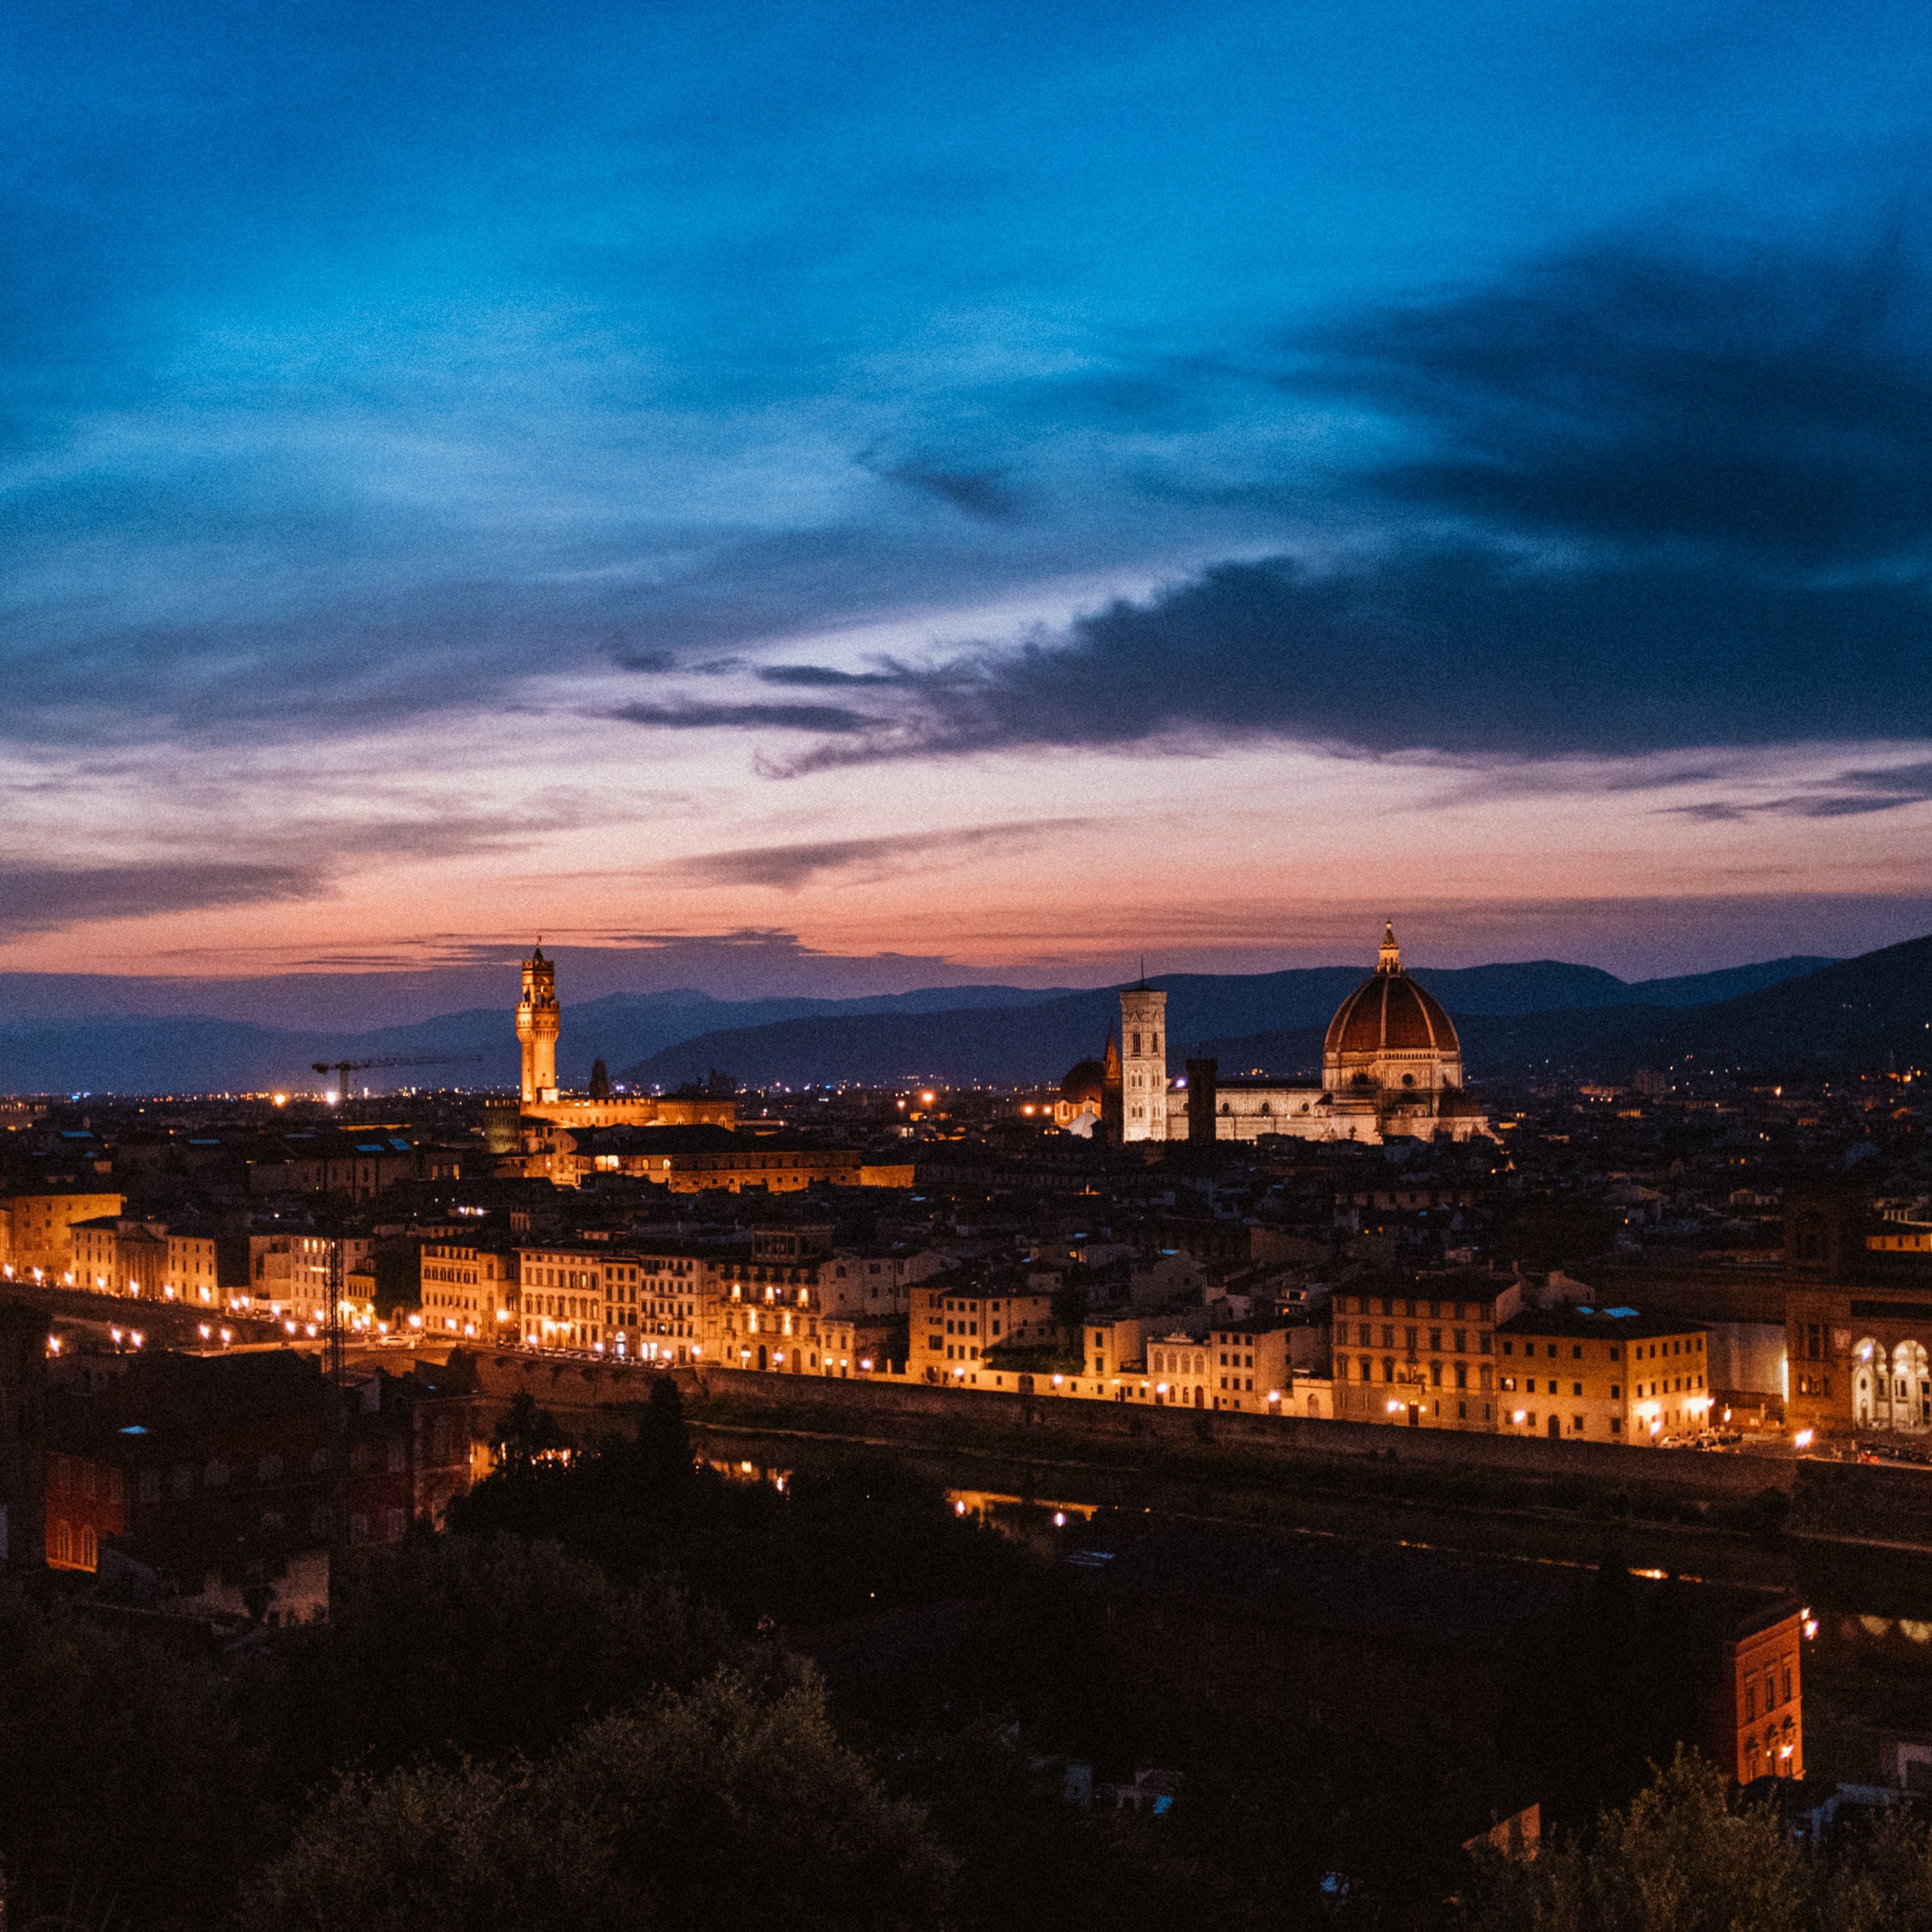 Download wallpaper 3415x3415 florence, italy, night city, top view ipad pro 12.9 retina for parallax HD background